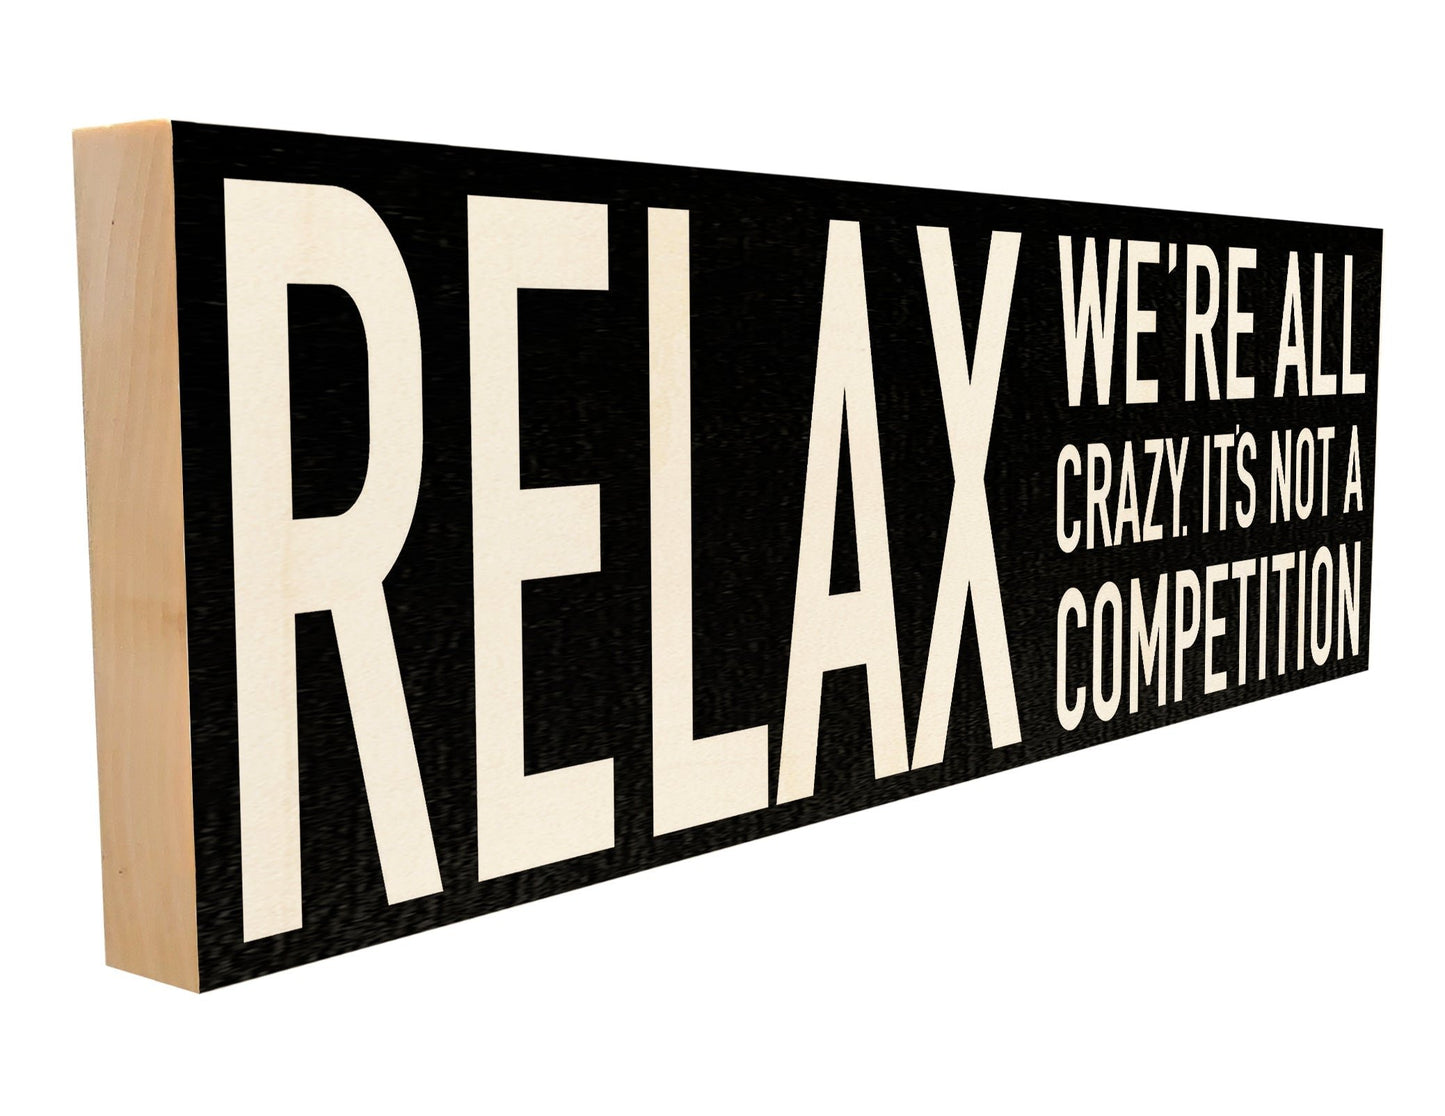 Relax. We're All Crazy. It's Not a Competition.